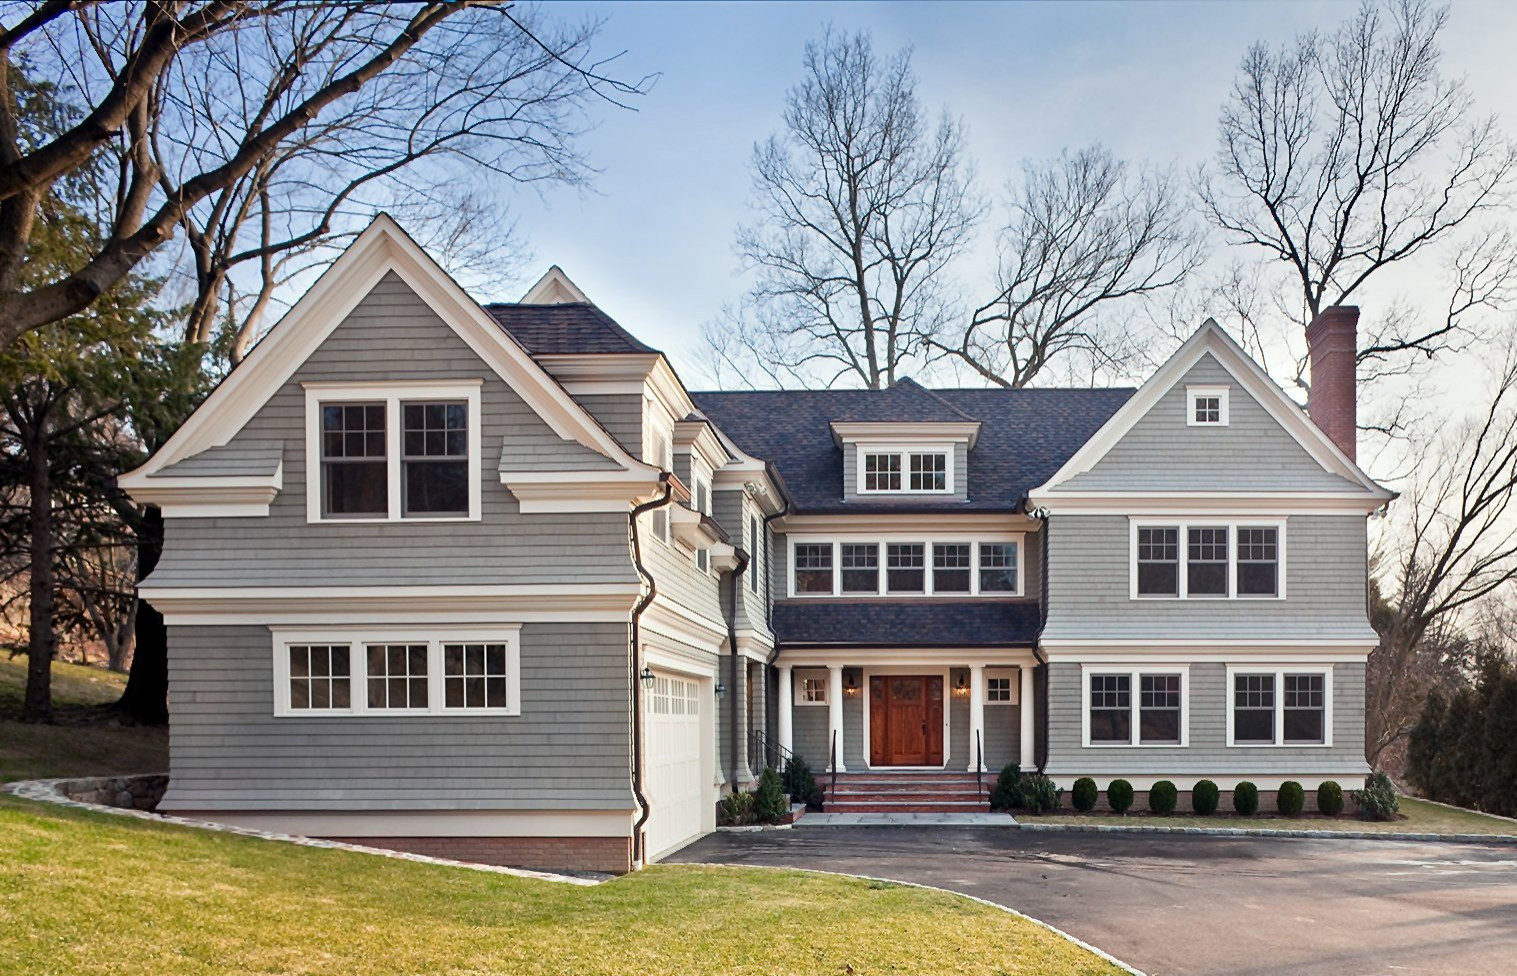 Inspiration for a mid-sized craftsman gray two-story wood exterior home remodel in New York with a shingle roof